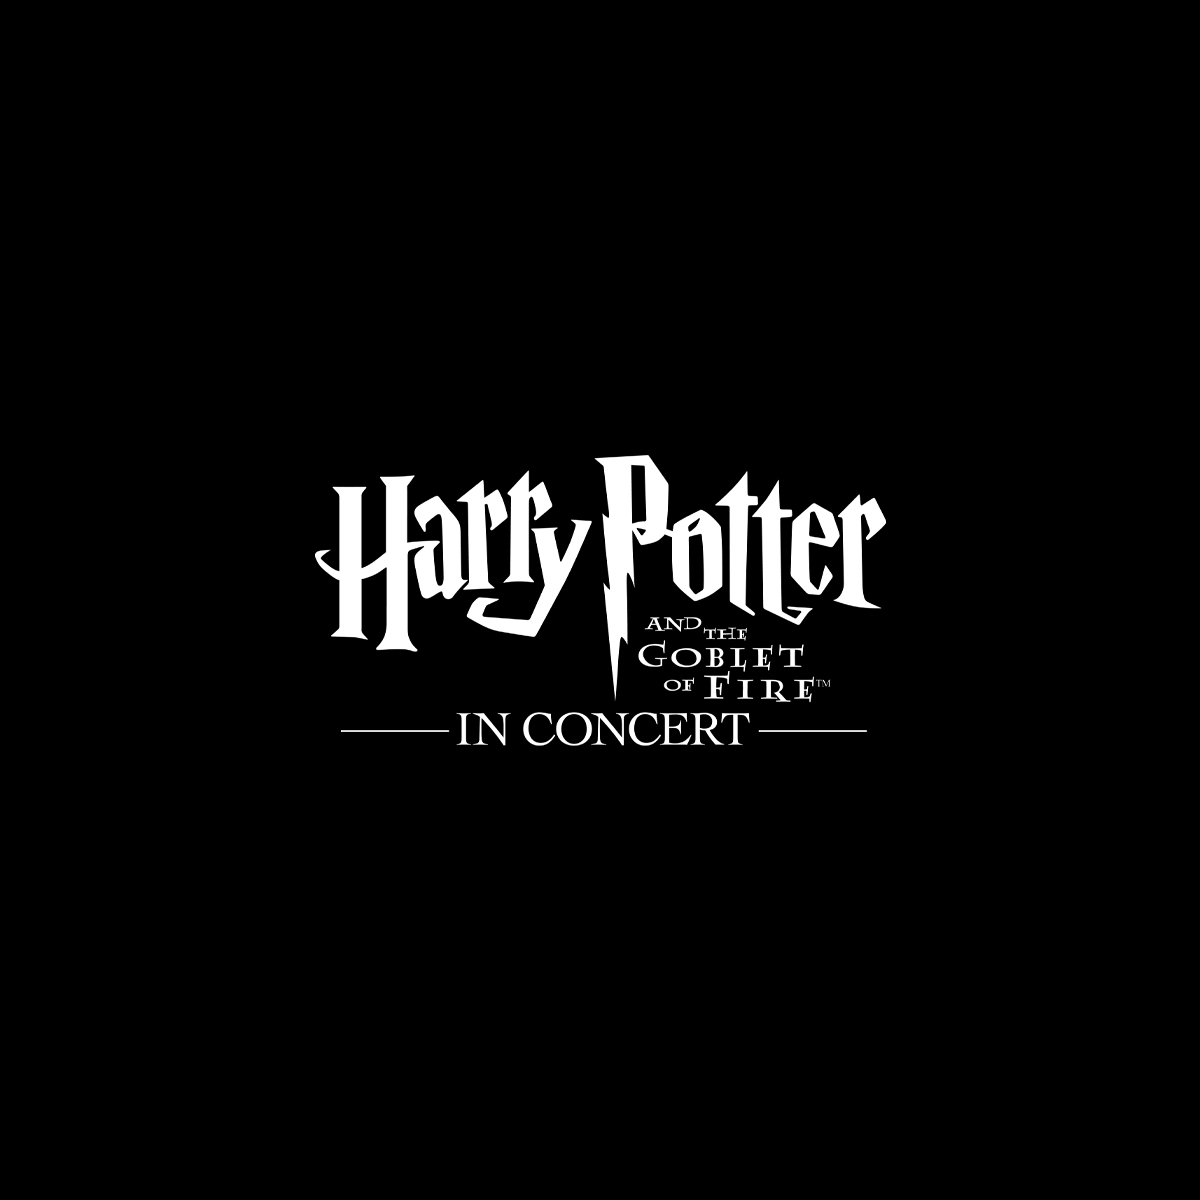 Image for Harry Potter and the Goblet of Fire™ in Concert